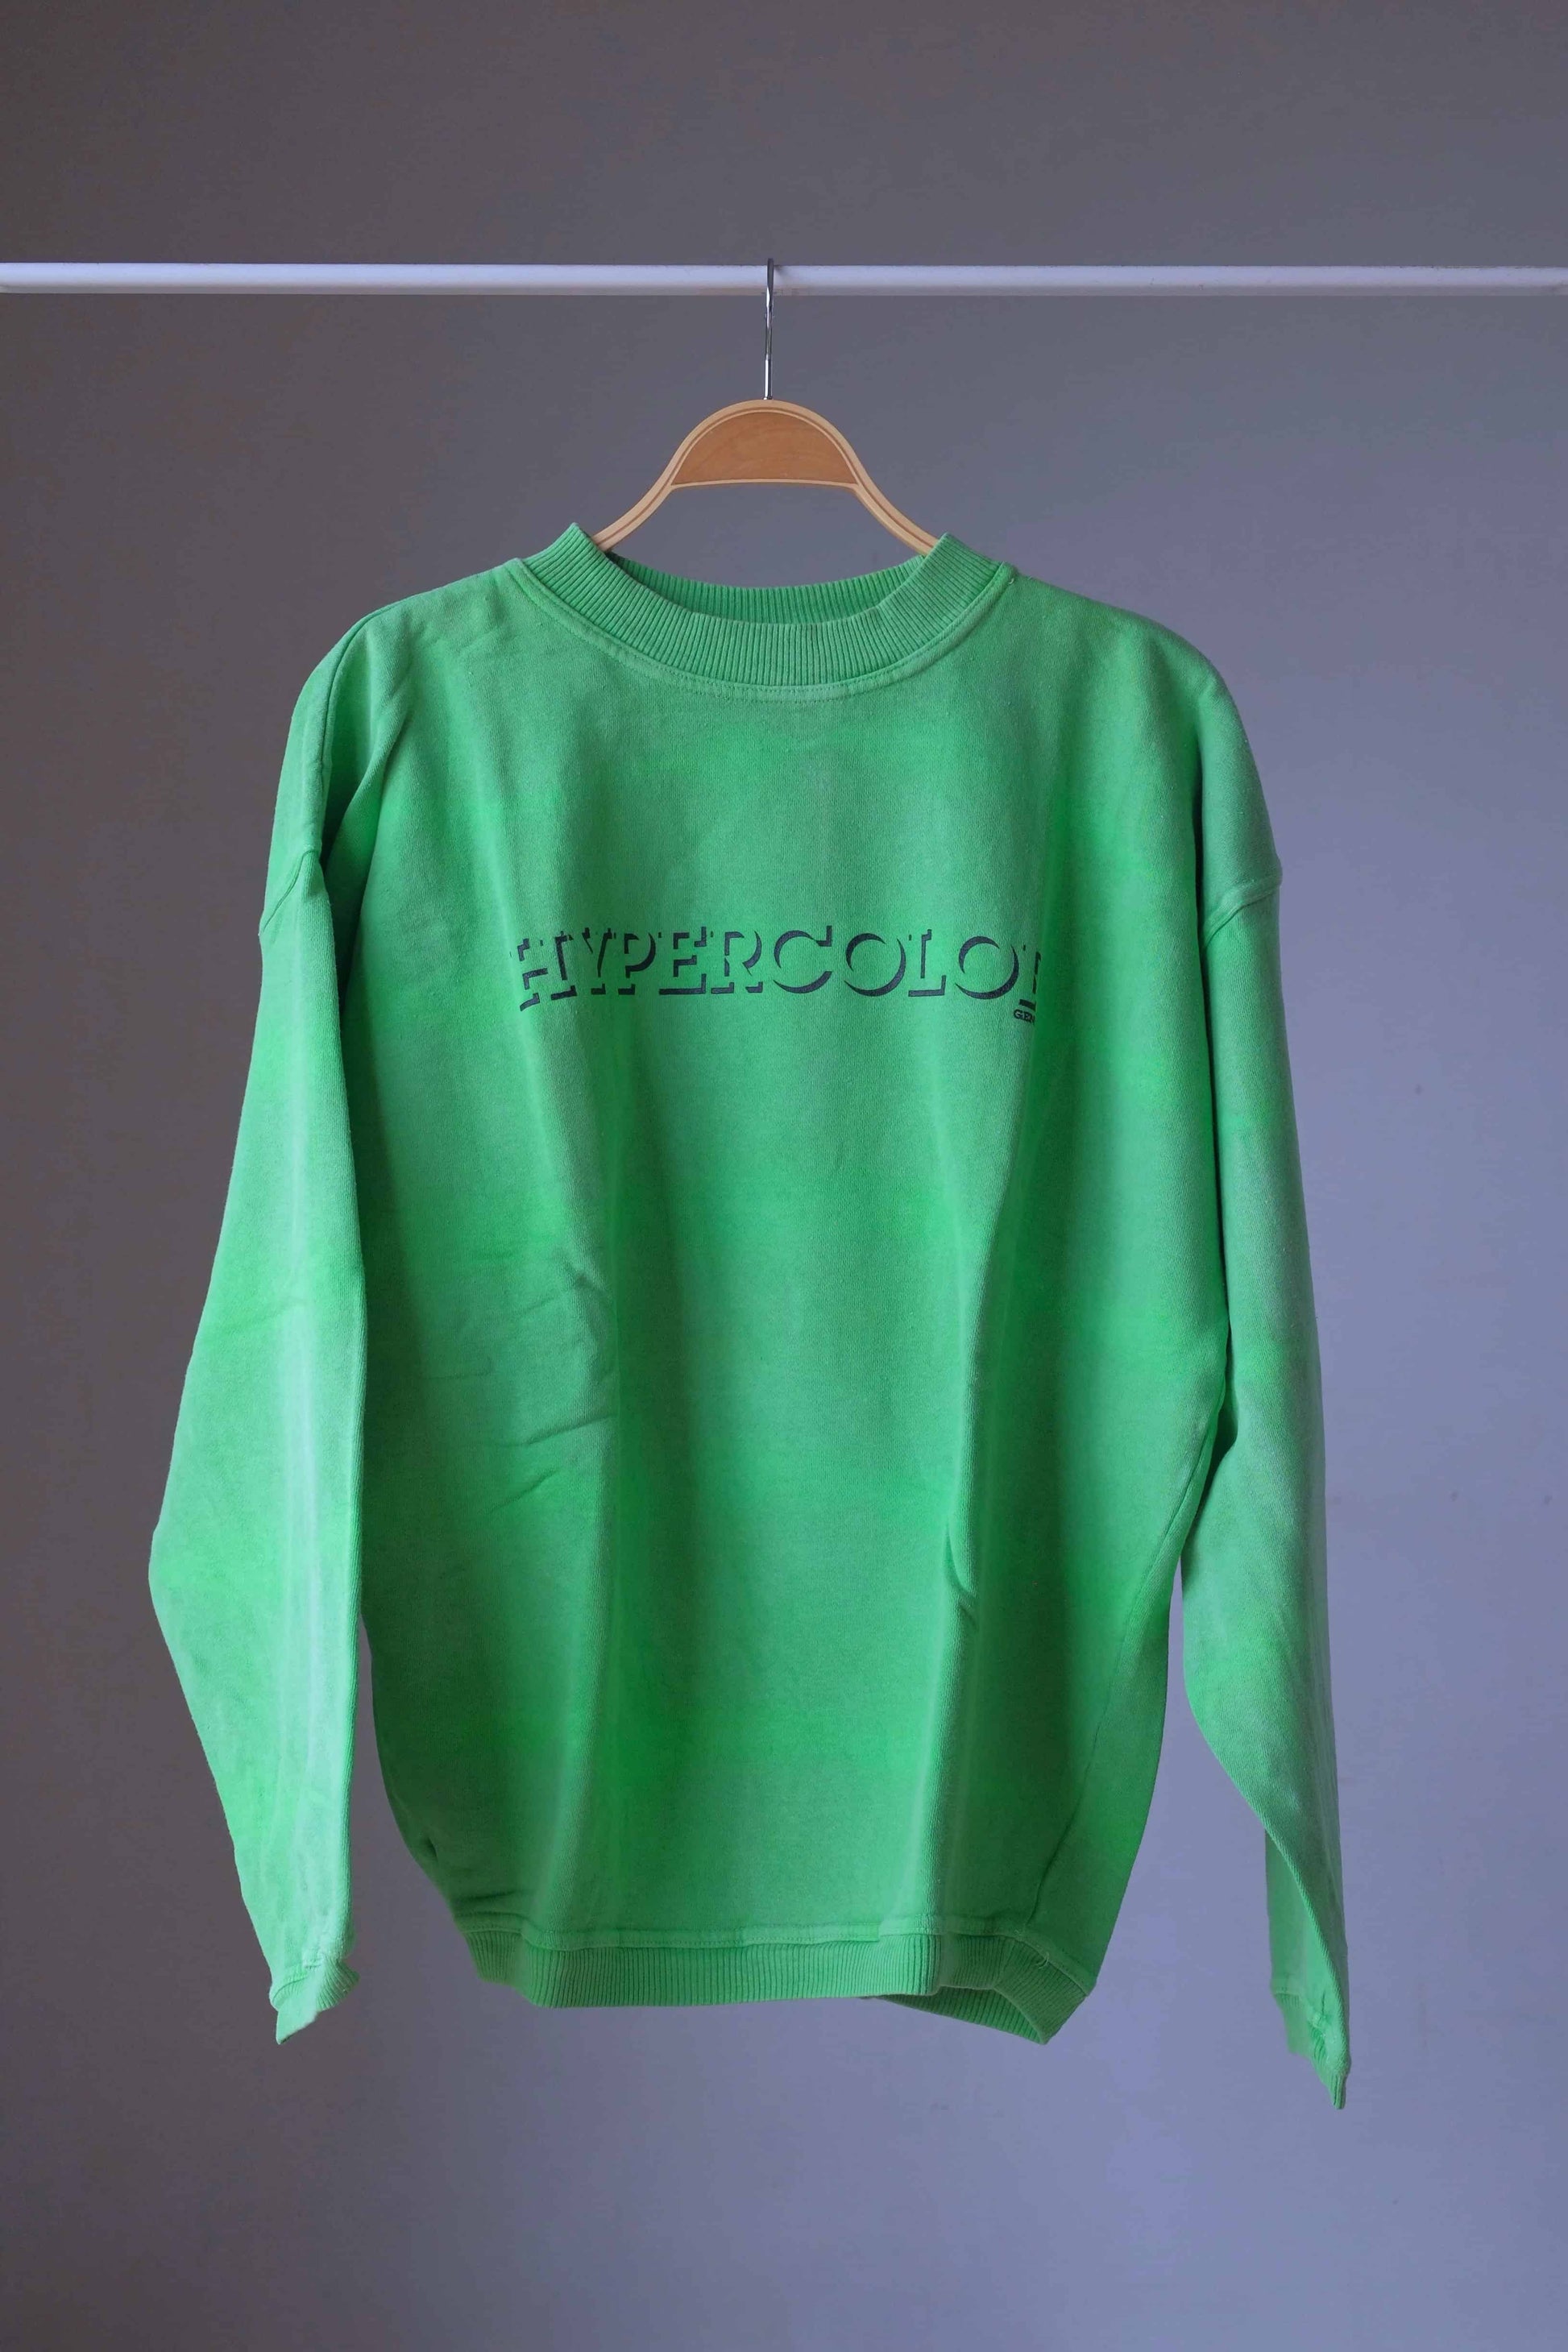 90's Hypercolor Color Changing Sweatshirt lime green